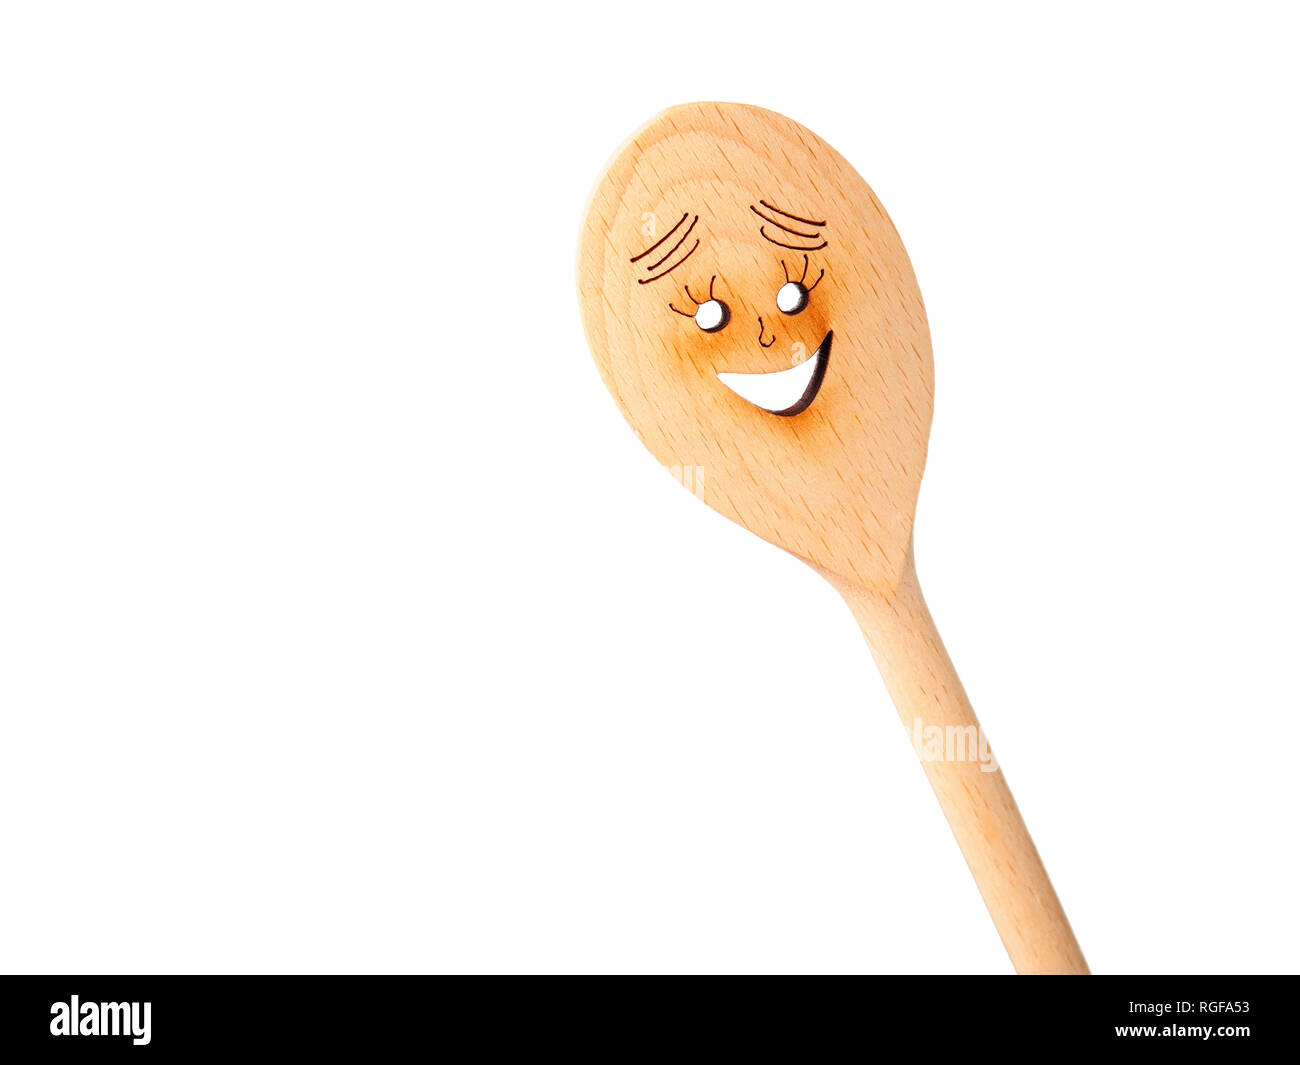 Tool. Wooden spool with an happy face painted on. Stock Photo